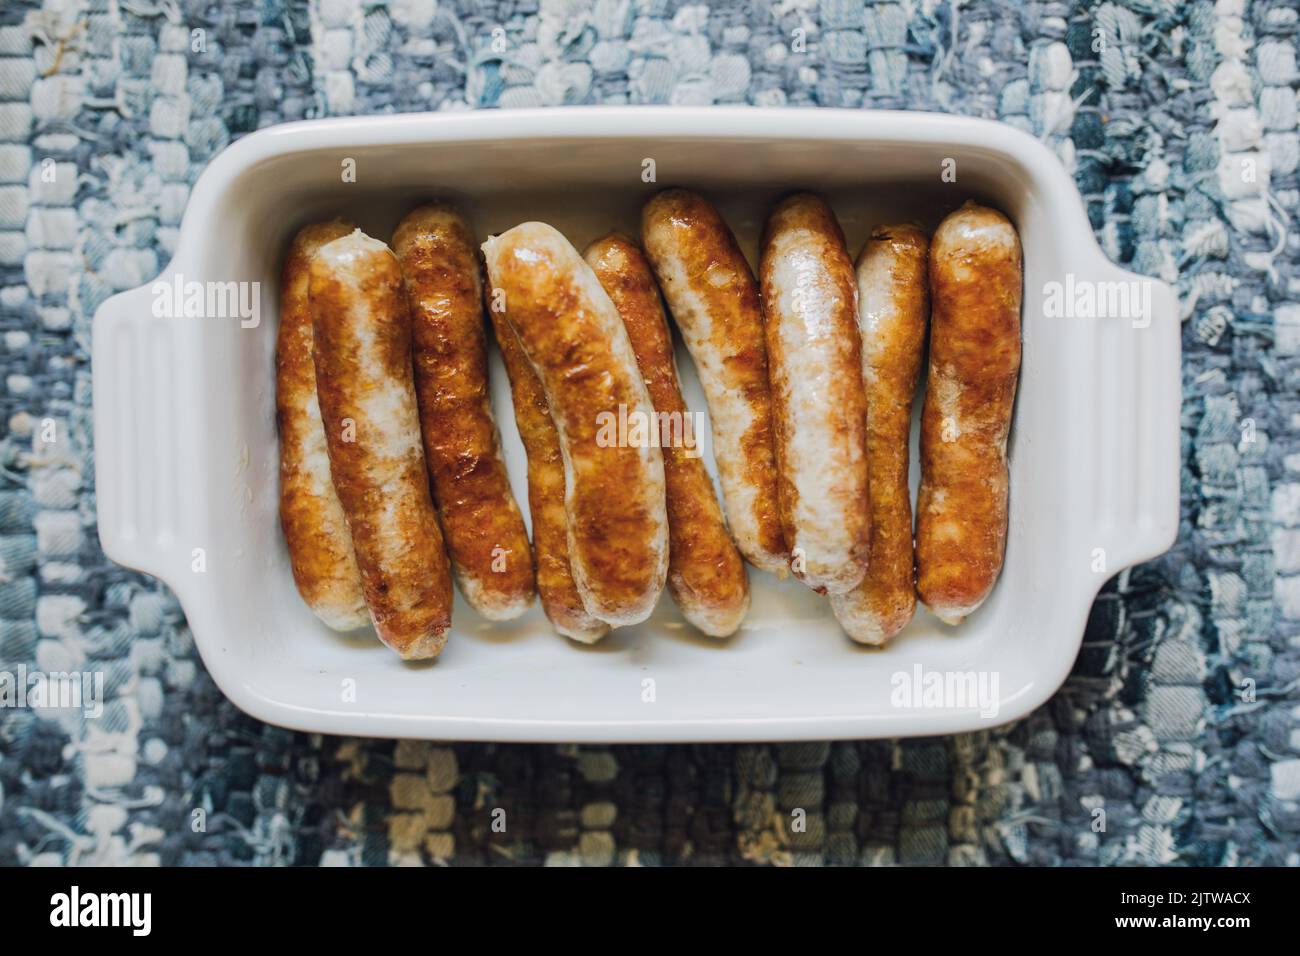 bbrowned, cooked individual breakfast sausage links in white dish on blue placemat, table Stock Photo